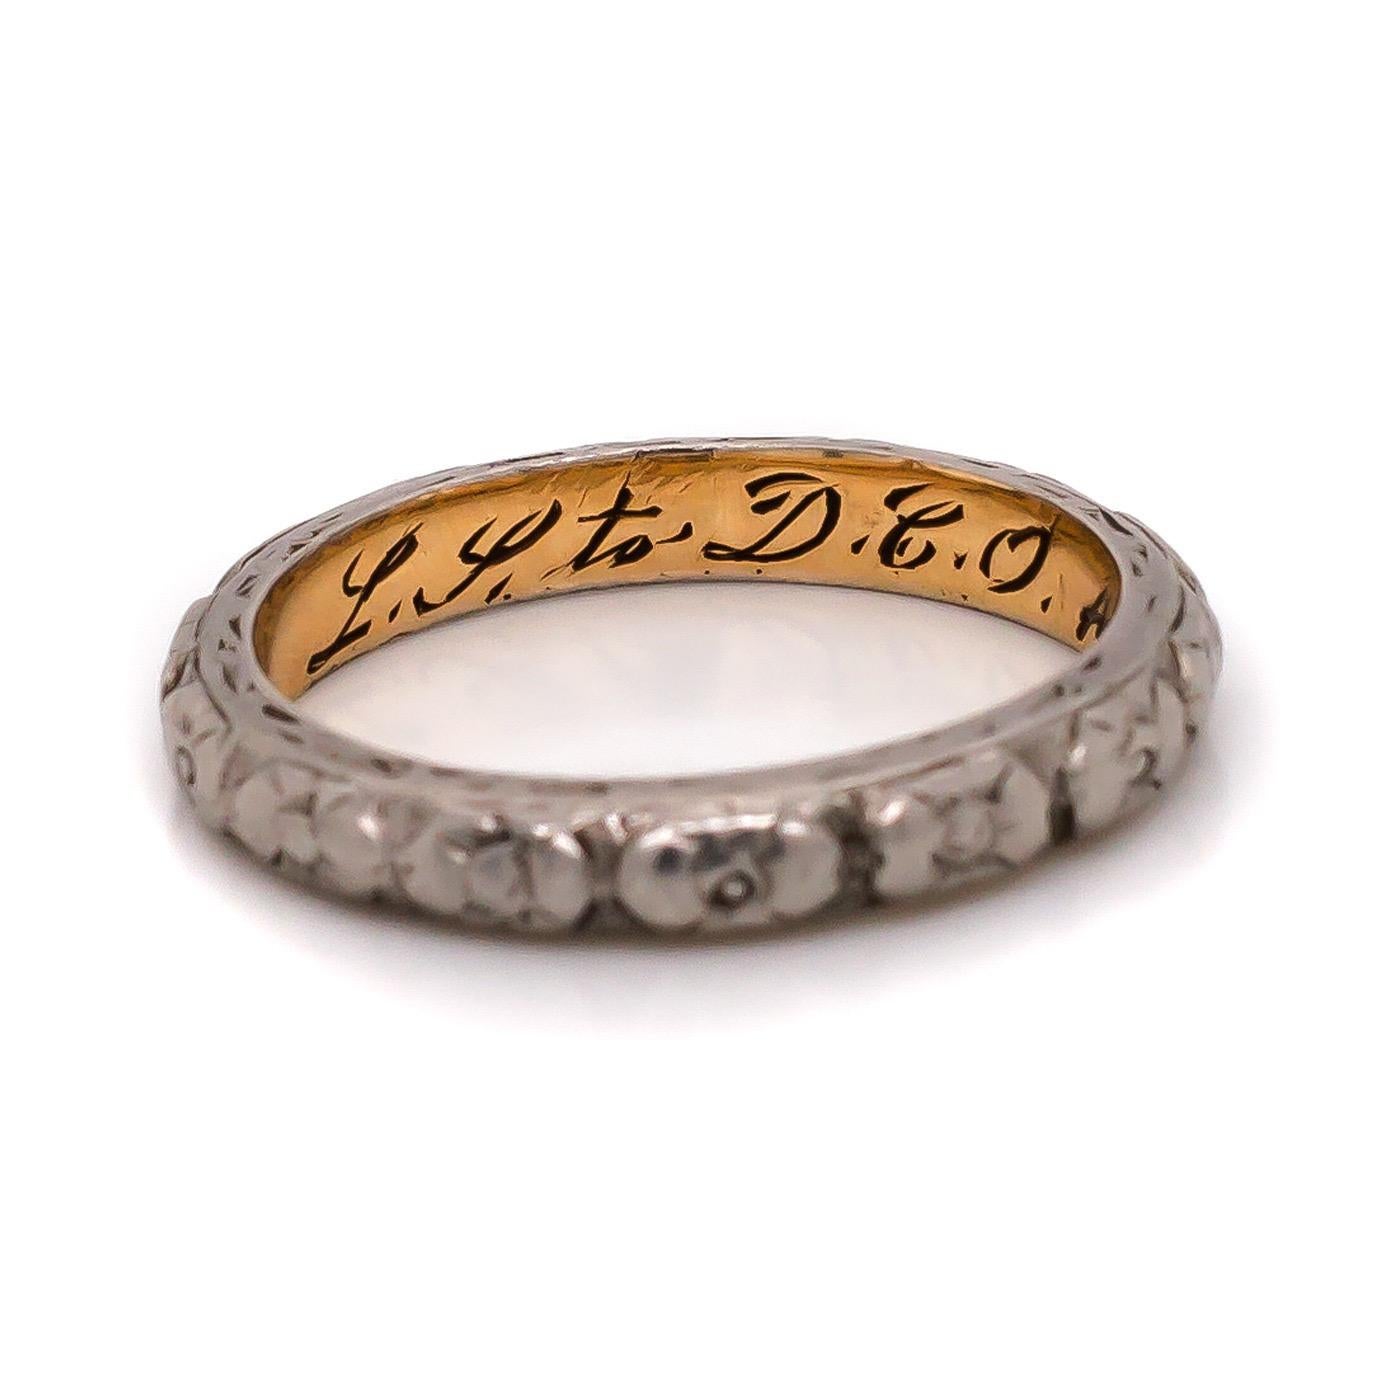 This Art Nouveau Vintage wedding band dates back all the way to 1904. It was was designed in platinum and 18 karat yellow gold! It can be used as a wedding band and with its versatility can also be worn as a beautiful stackable fashion band. A hand